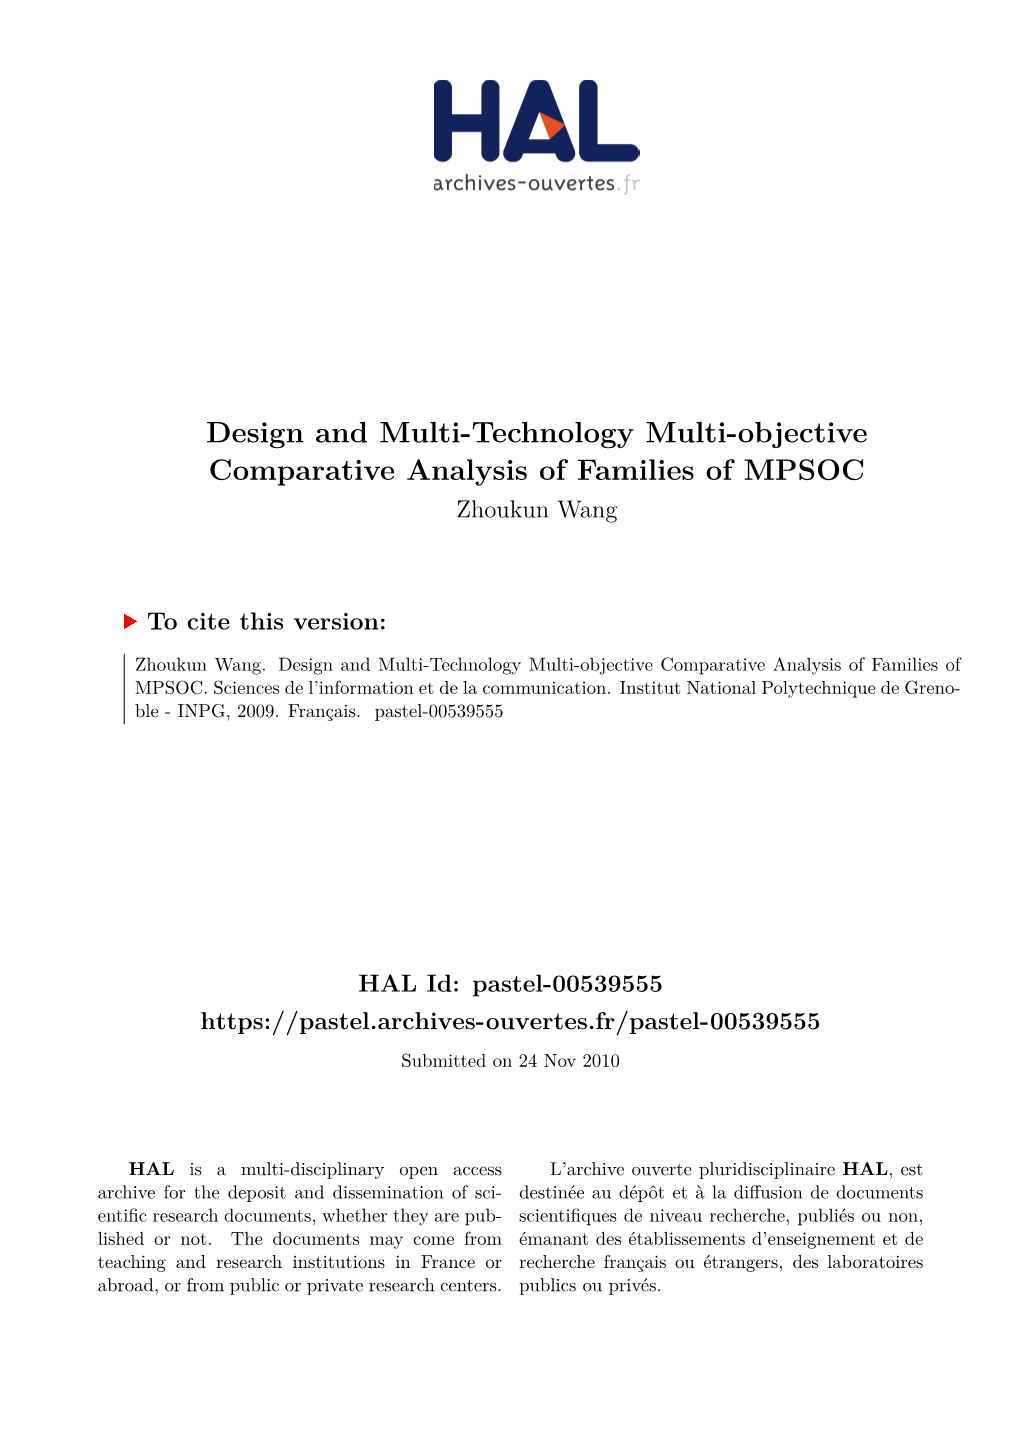 Design and Multi-Technology Multi-Objective Comparative Analysis of Families of MPSOC Zhoukun Wang